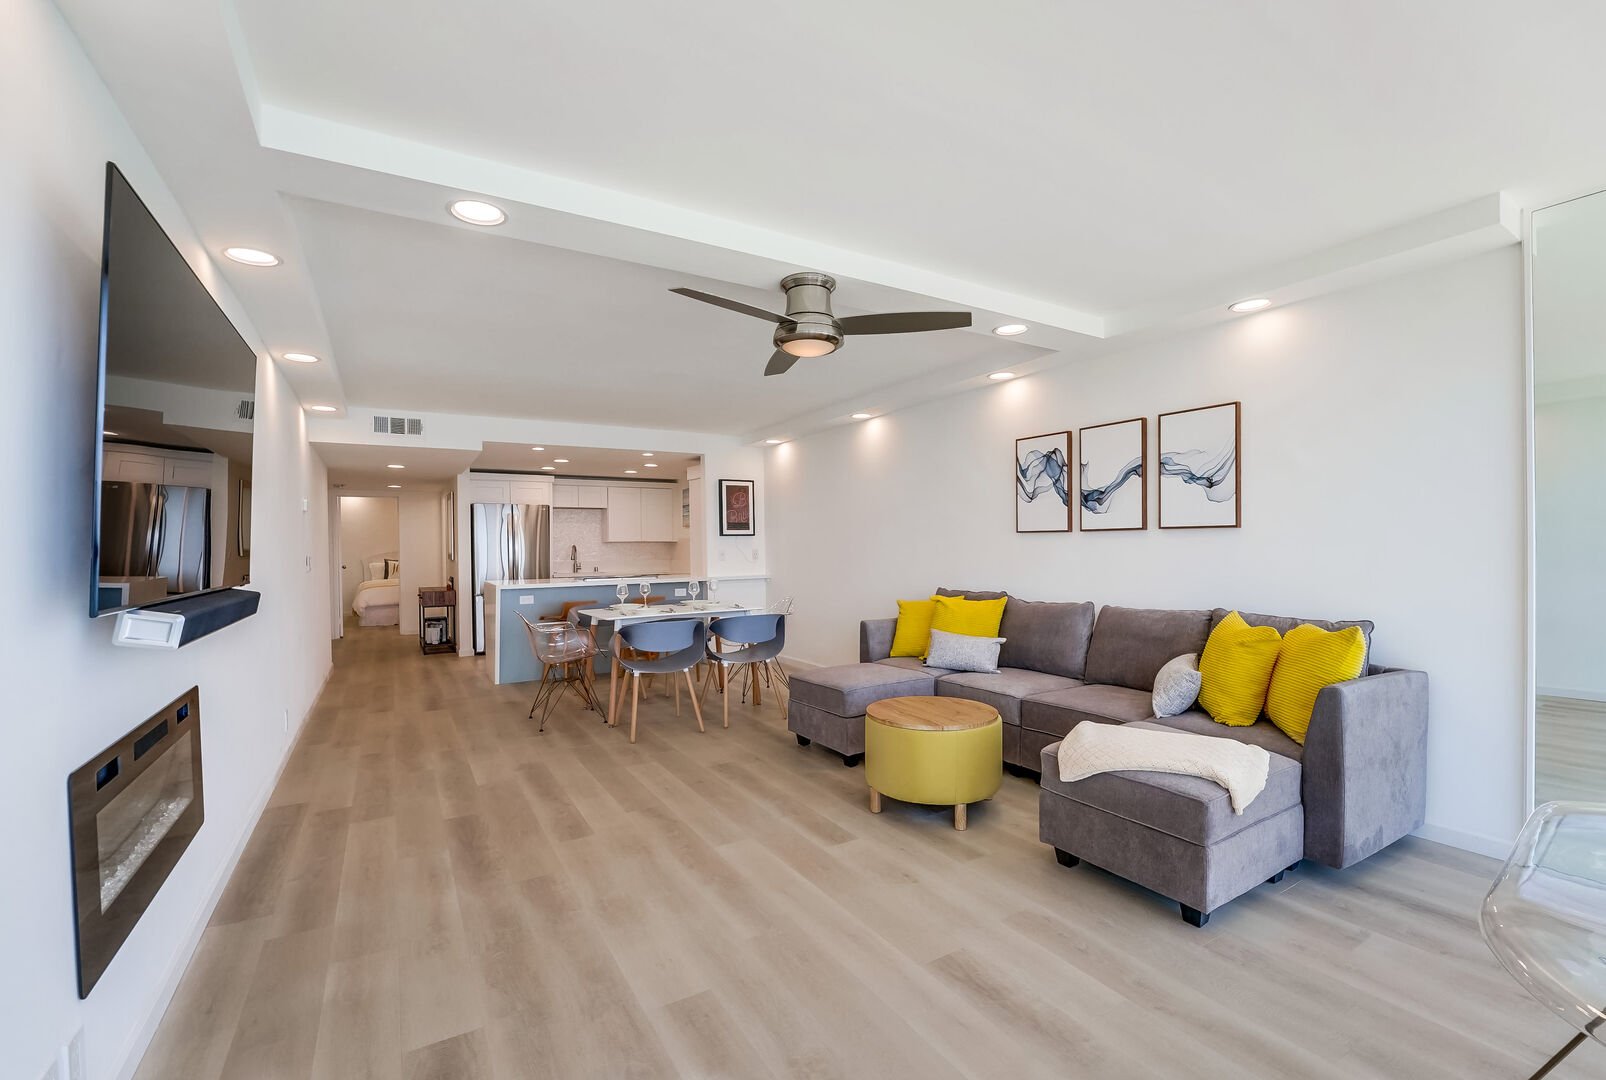 Living space includes sofa, electric fireplace, ceiling fan, smart TV, dining table for 4-6, fully equipped kitchen with stainless steel appliances, breakfast bar with 2 stools and bedroom and bathroom toward the front of the unit